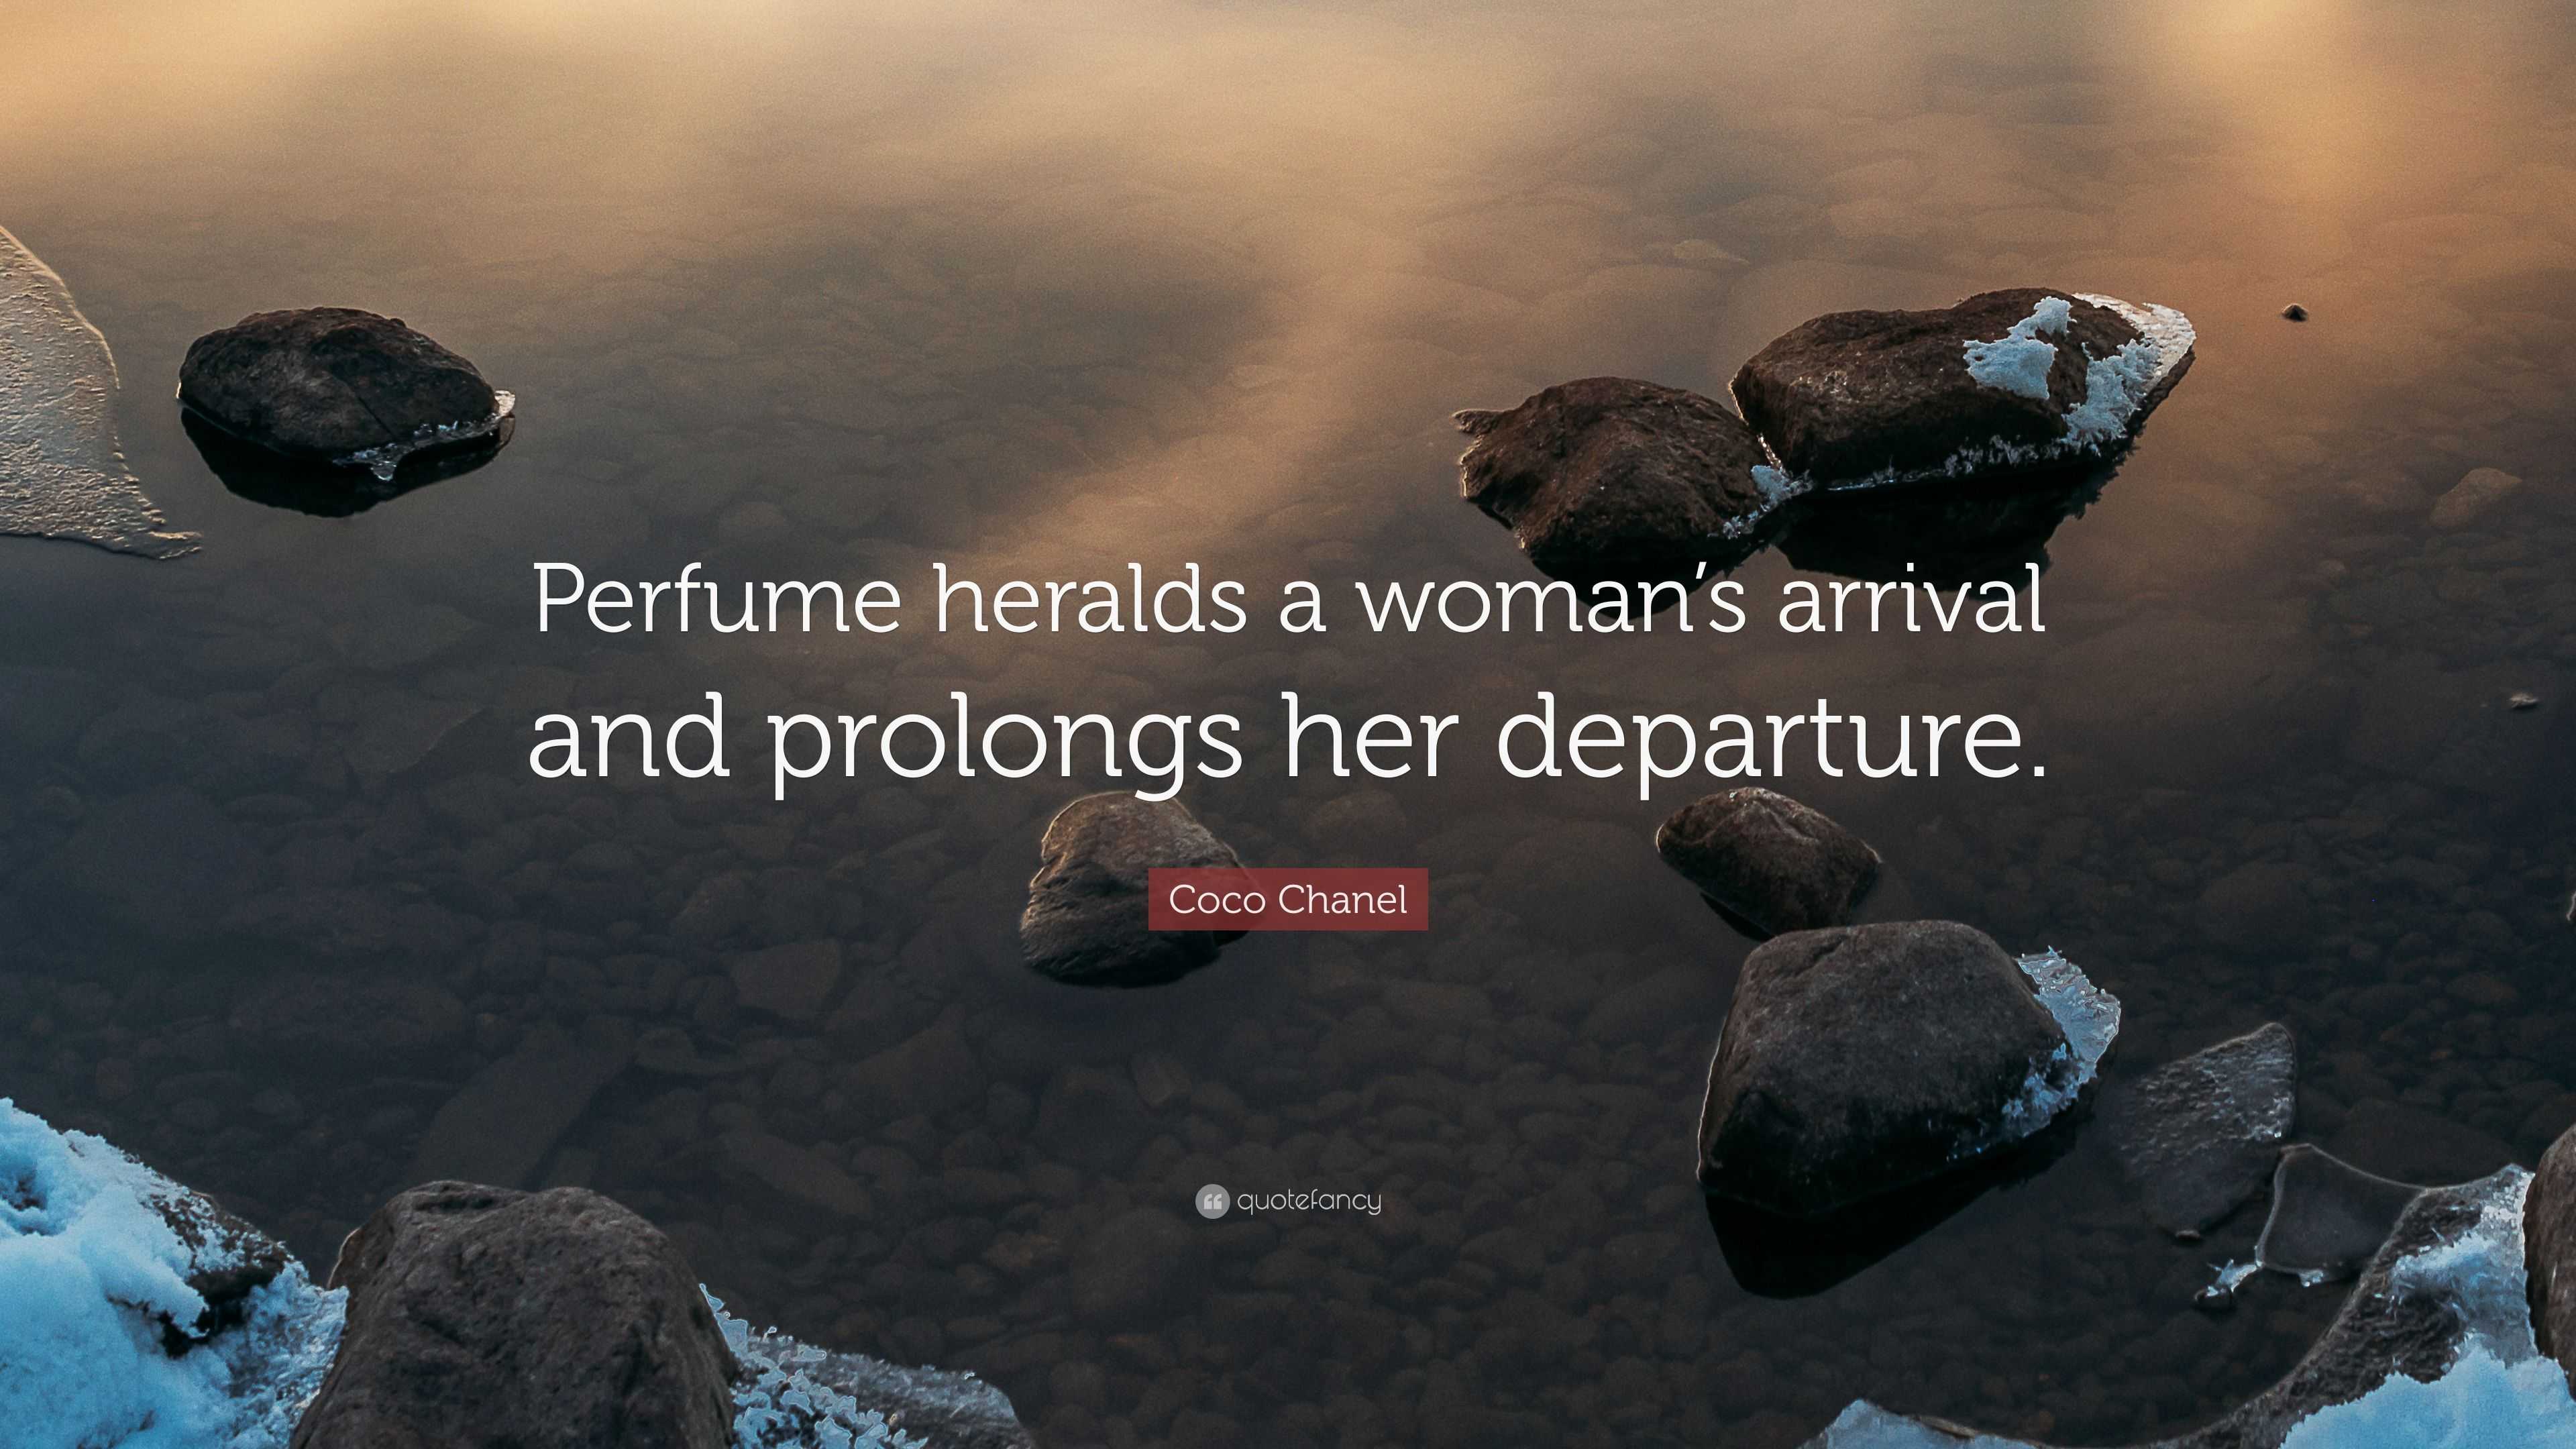 Coco Chanel Quote: “Perfume heralds a woman's arrival and prolongs her  departure.”